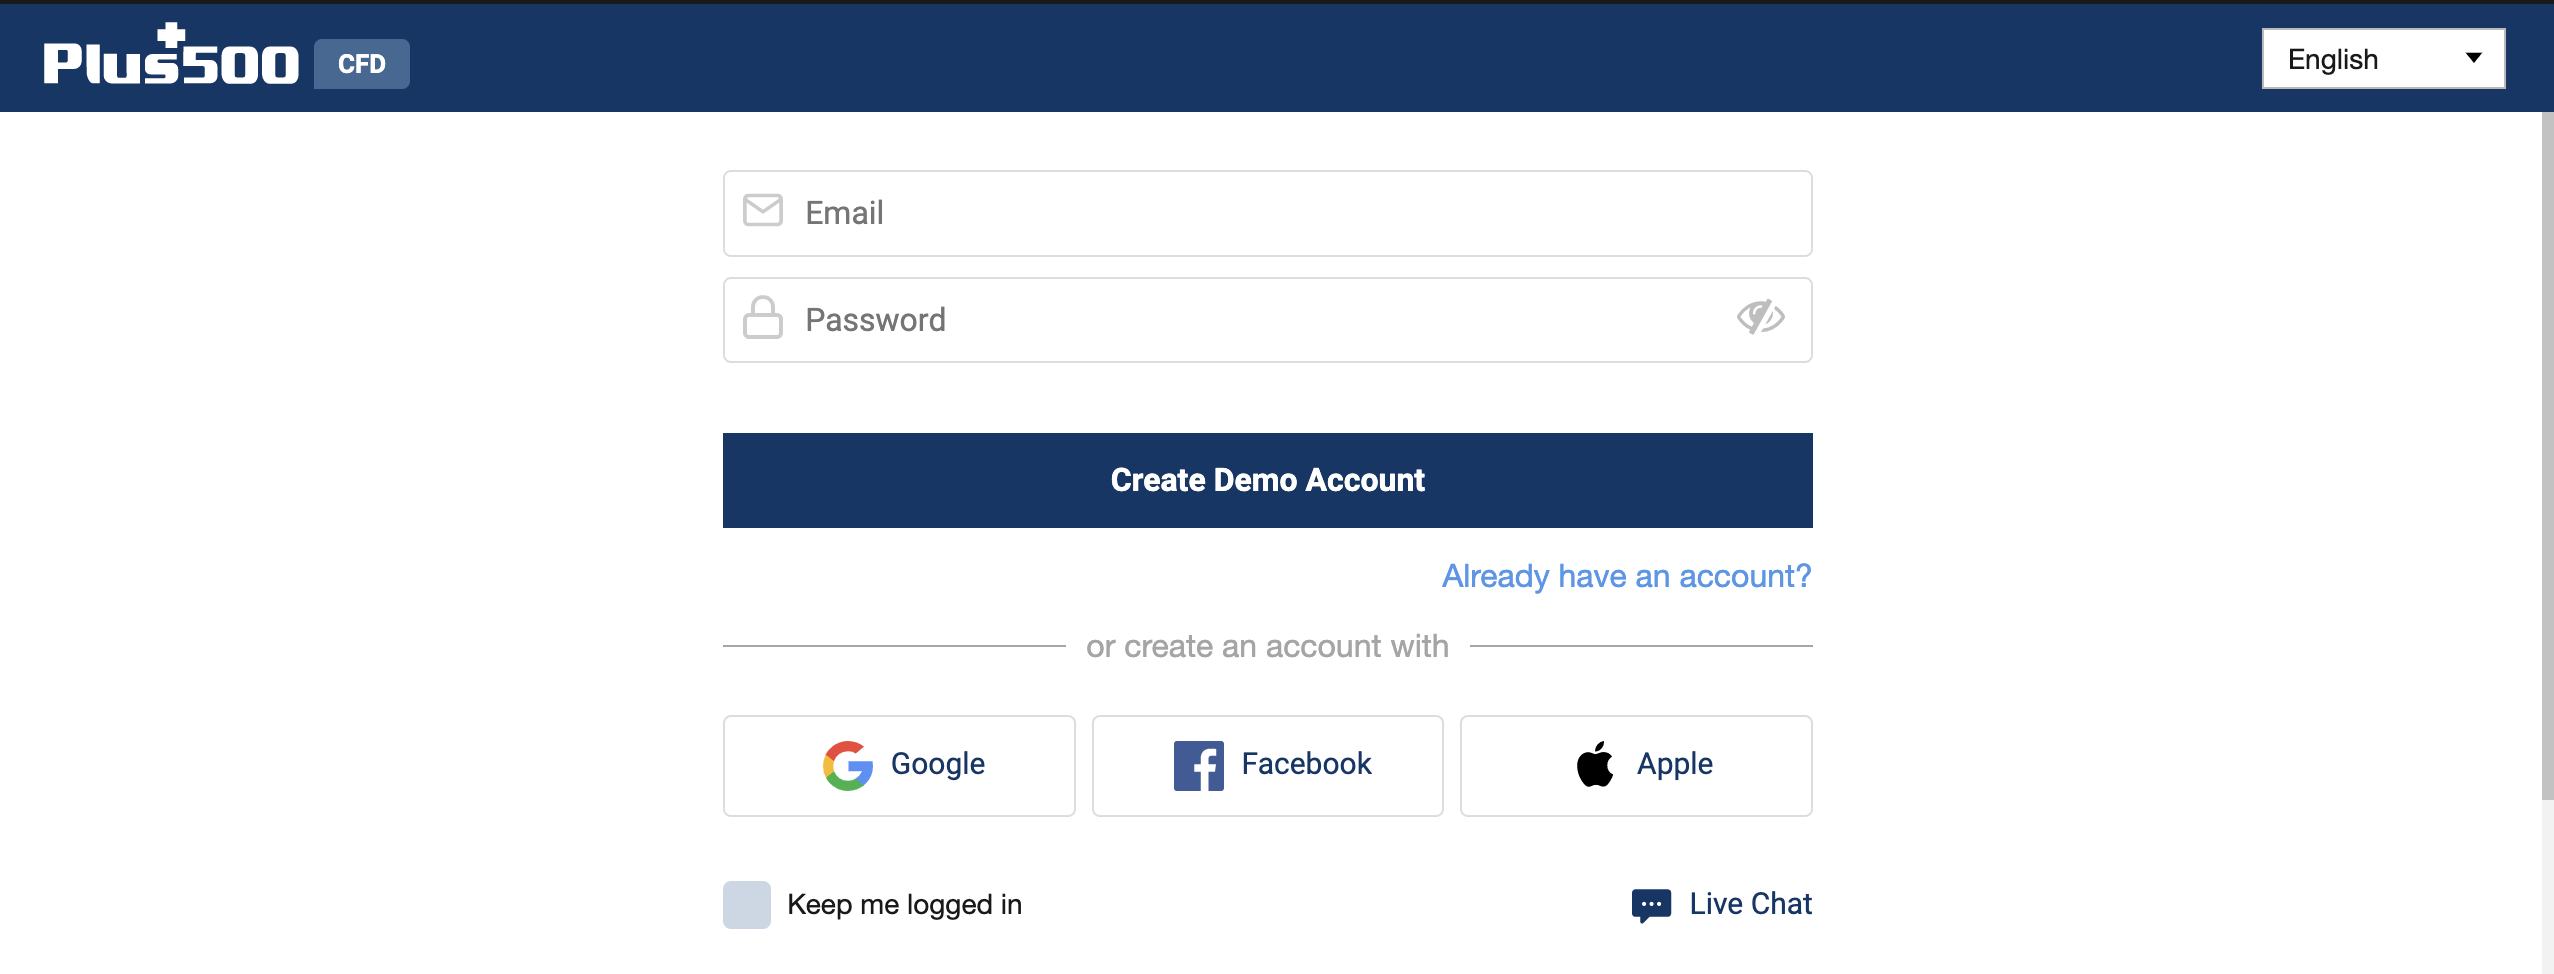 Creating a demo account in Plus500